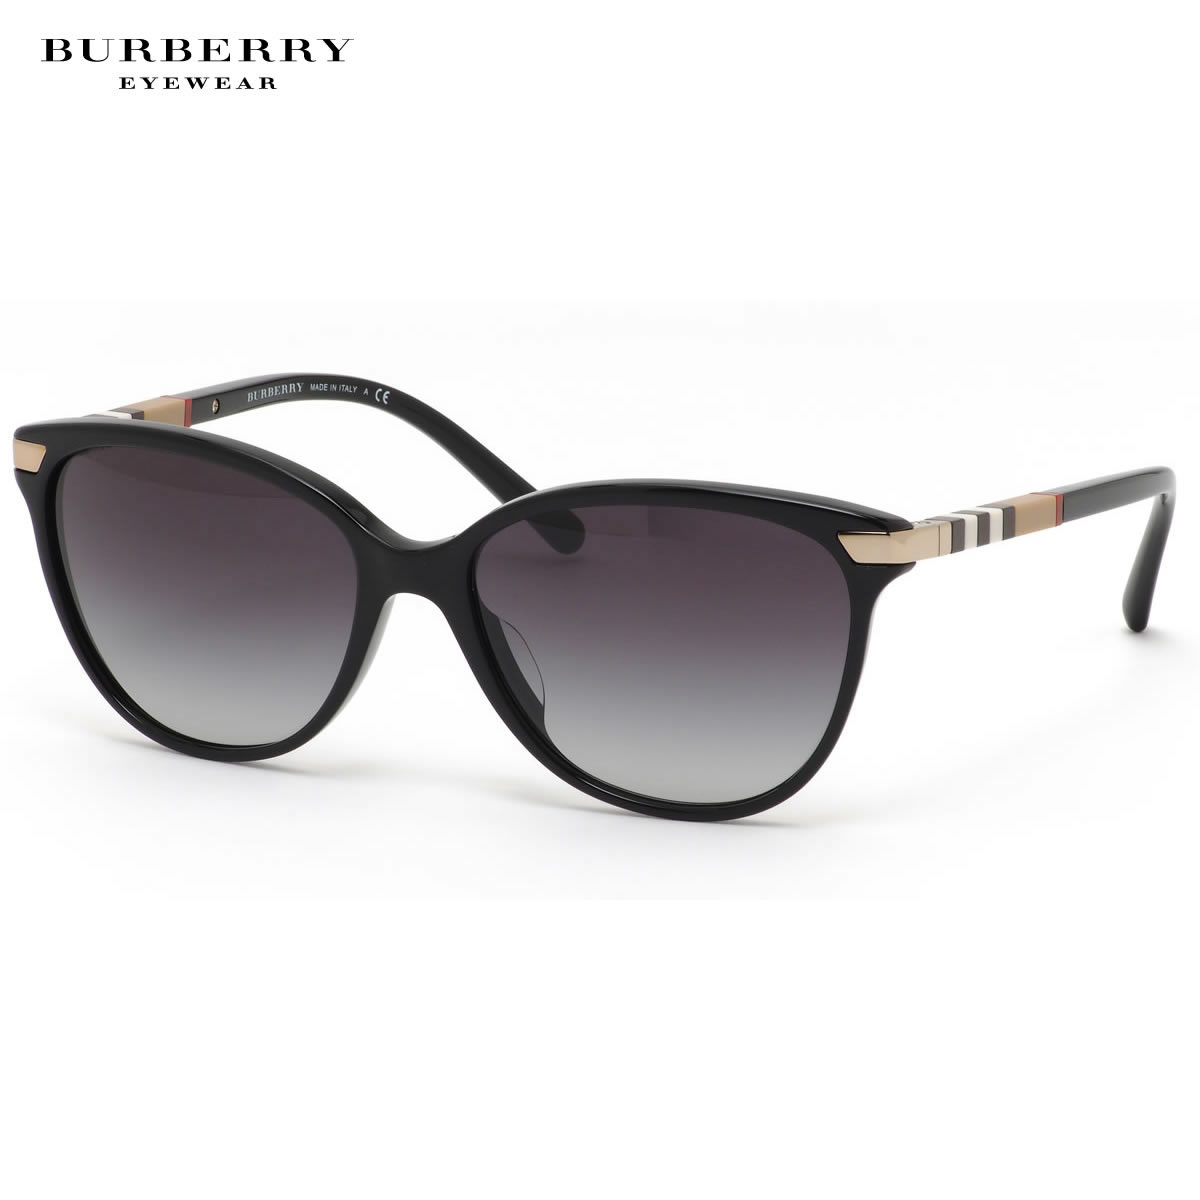 burberry glasses for sale